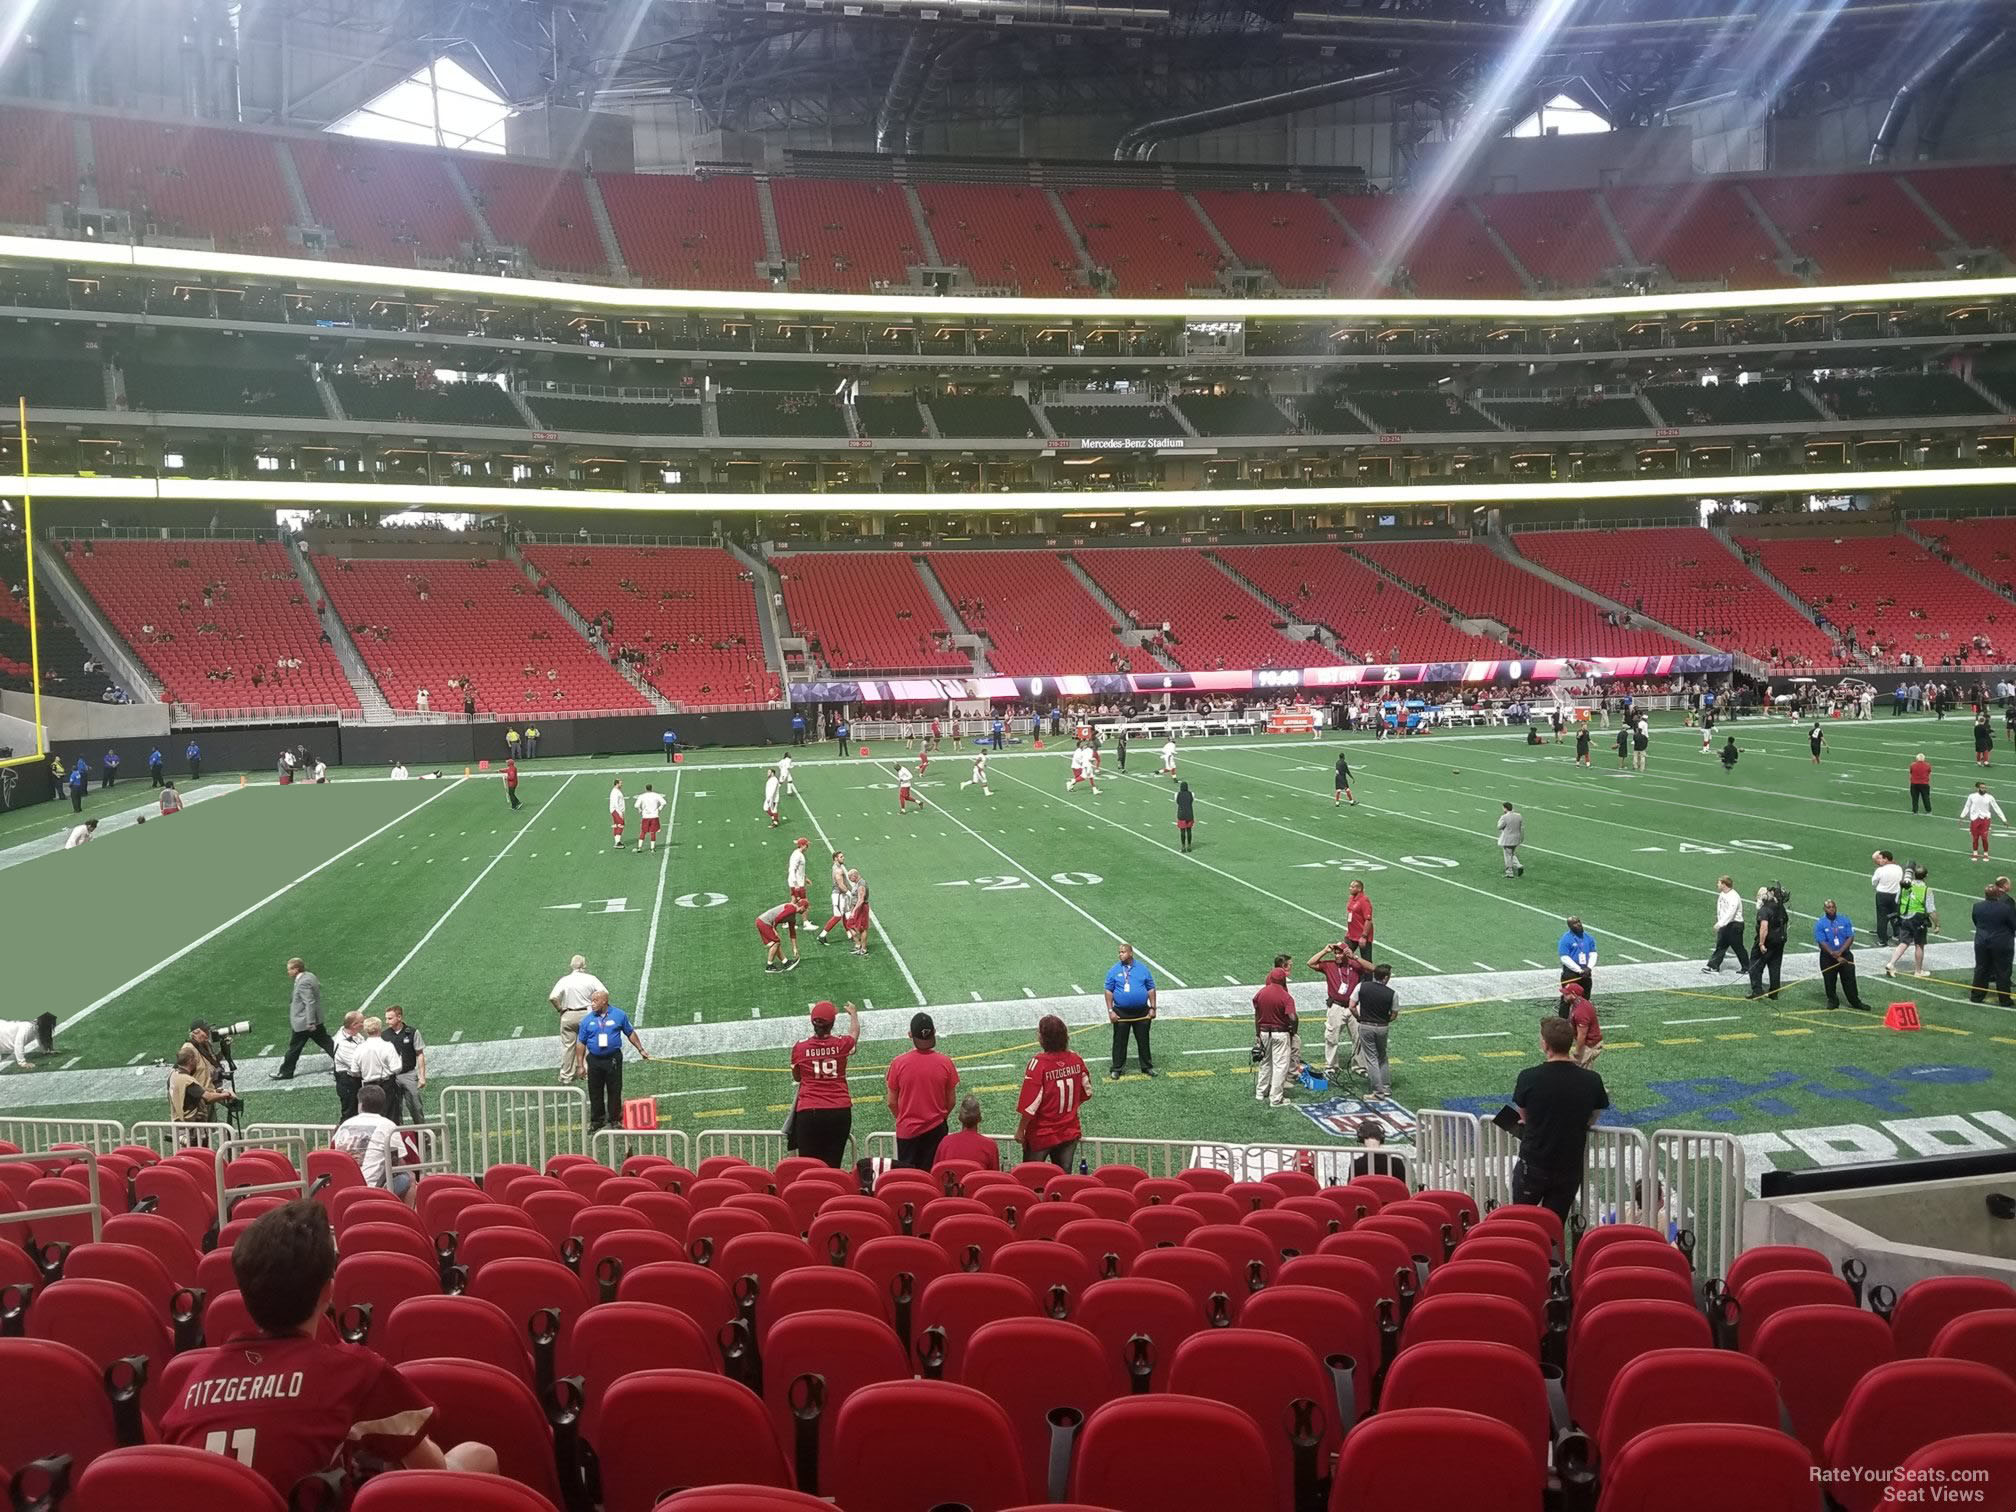 section 131, row 15 seat view  for football - mercedes-benz stadium